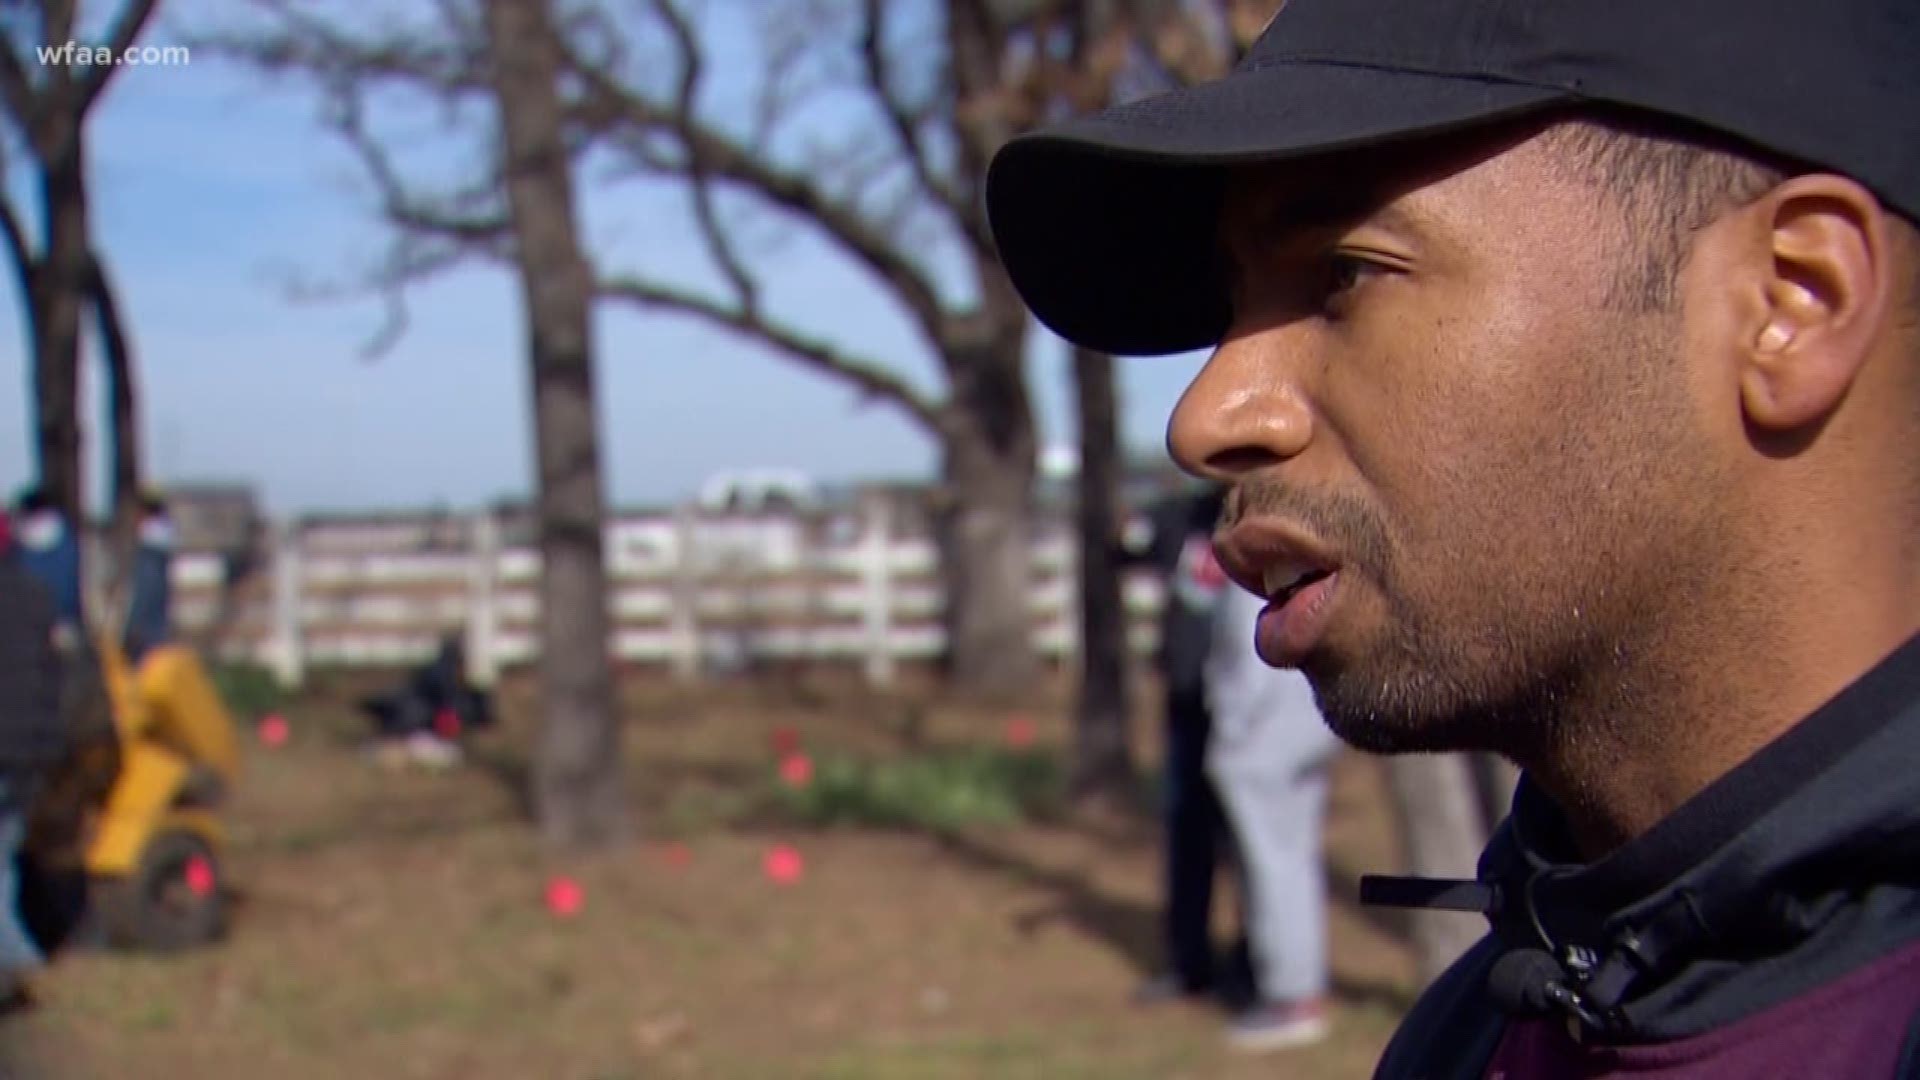 A group of volunteers in Irving honored the Rev. Dr. Martin Luther King, Jr. Monday.